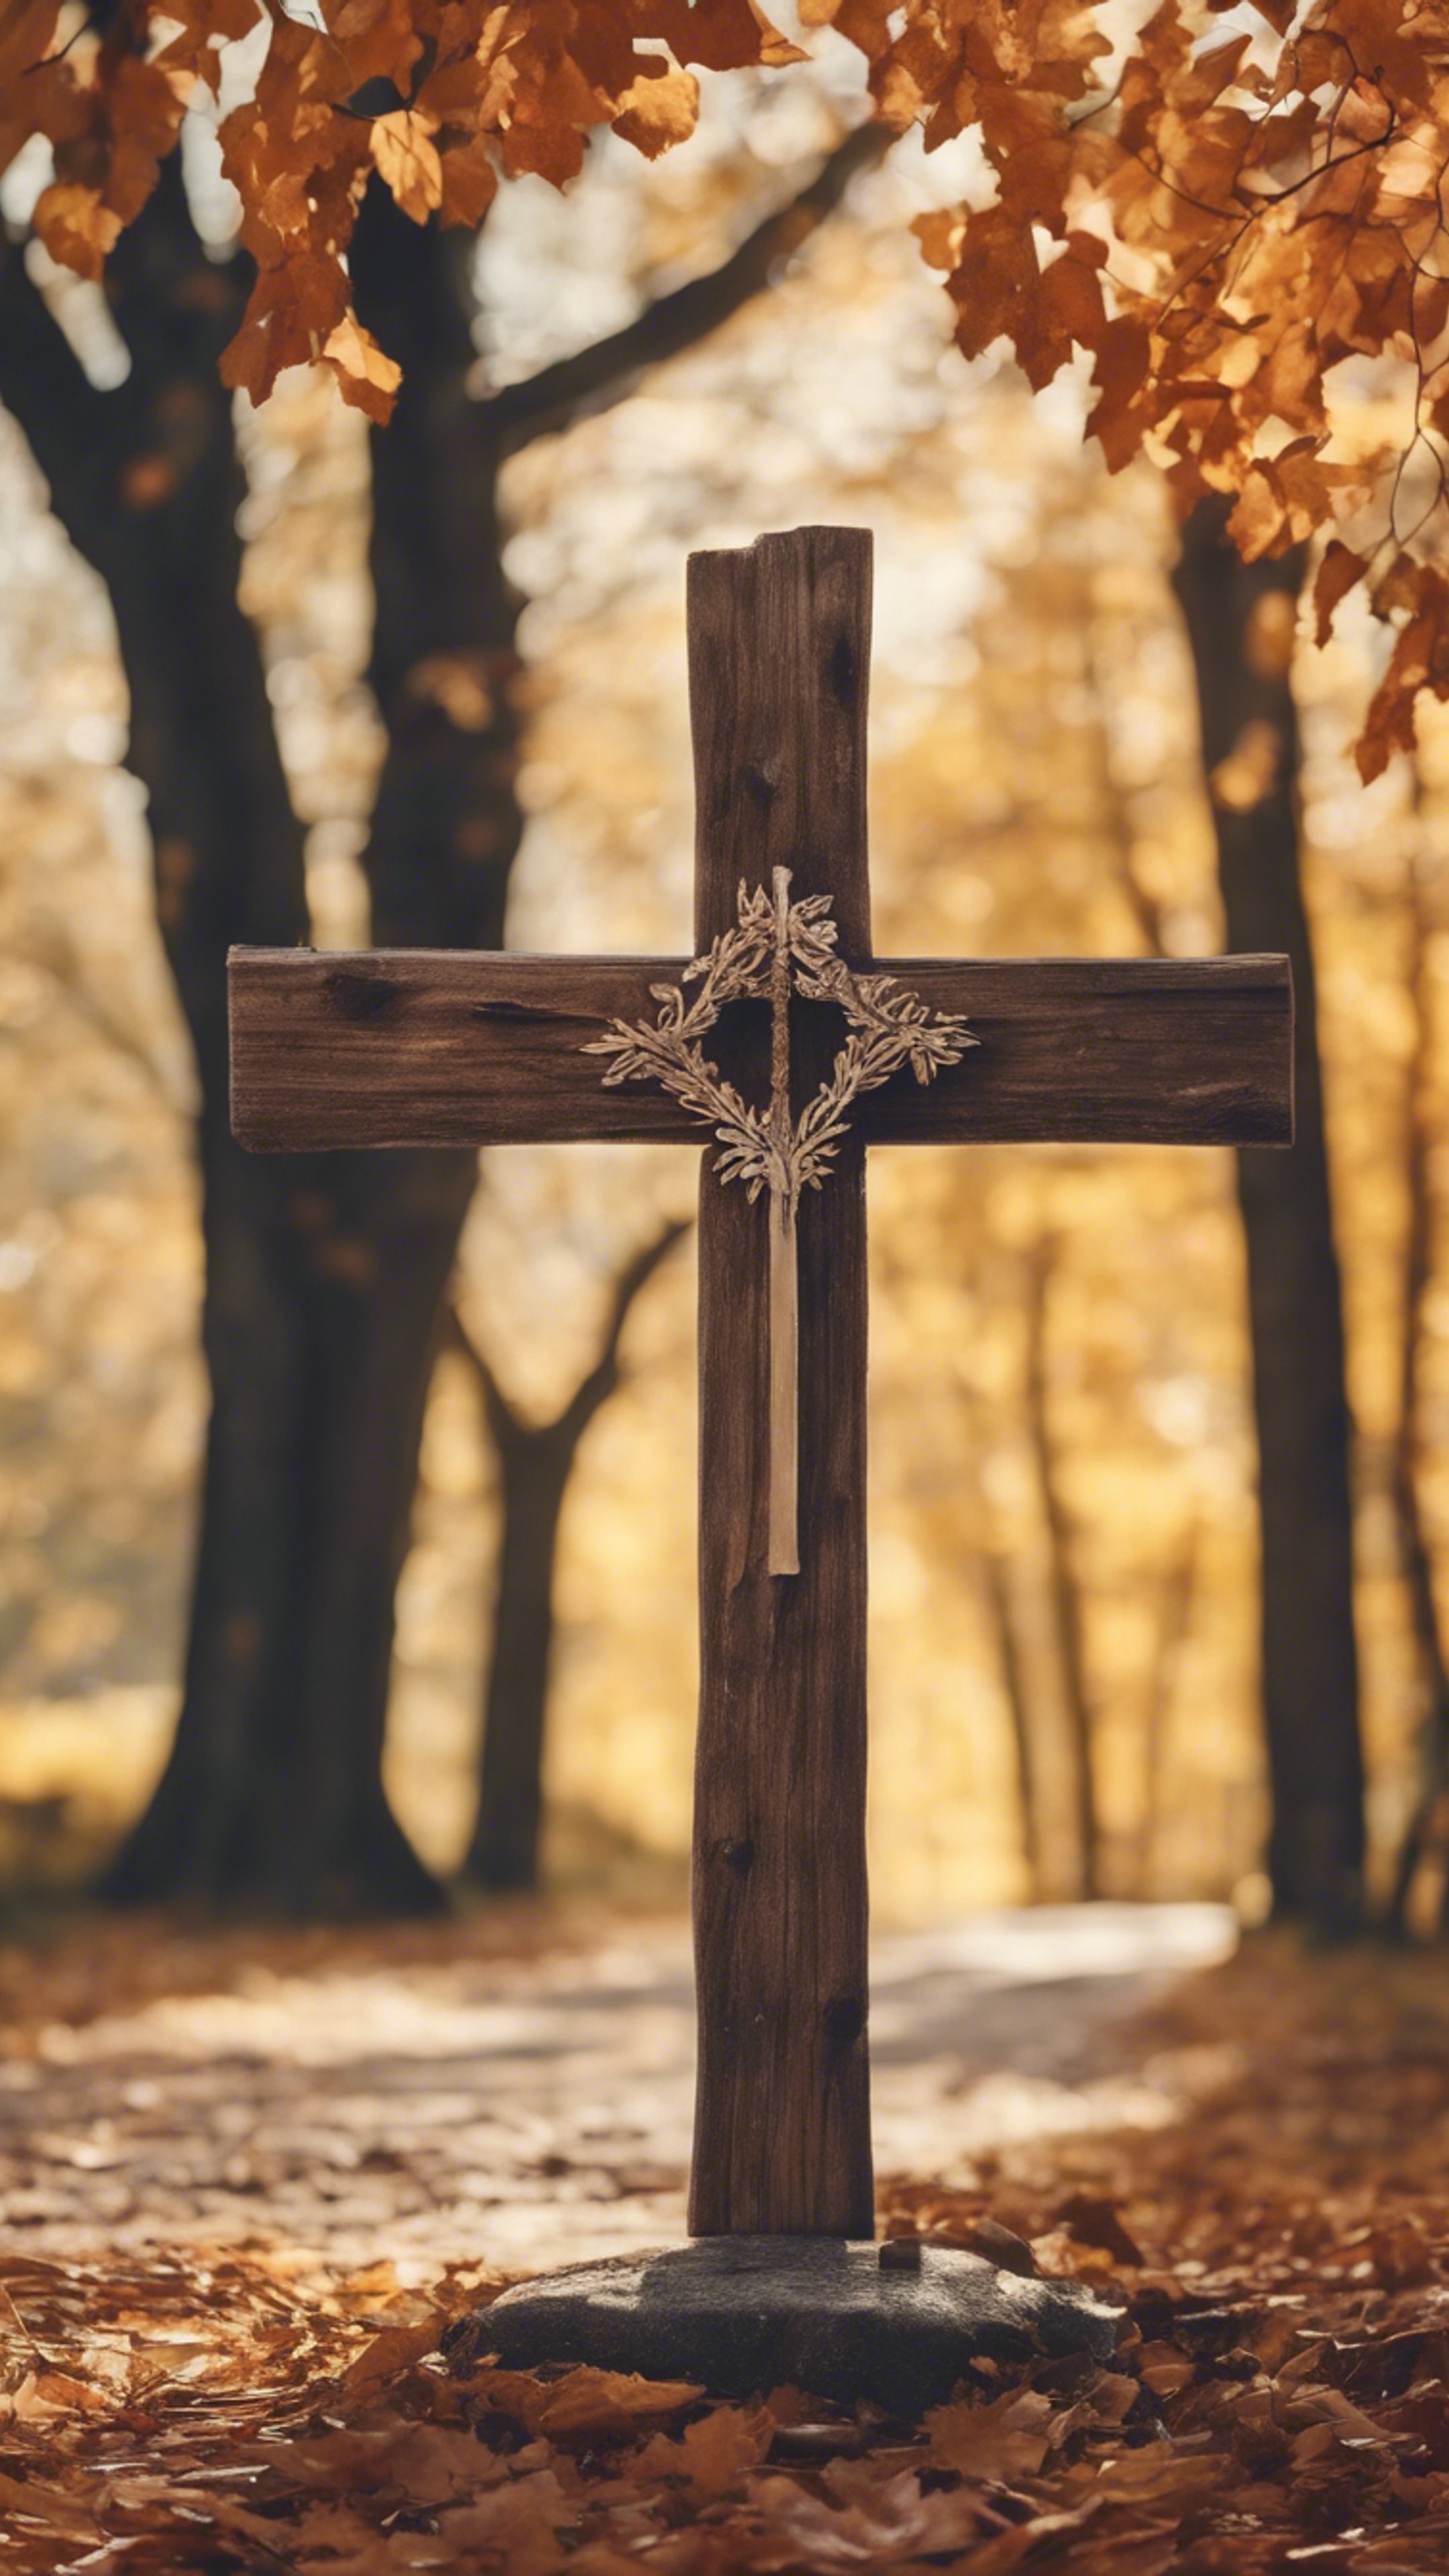 A rustic wooden cross standing by a country road, surrounded by autumn leaves. Обои[8ef87987617941c481d6]